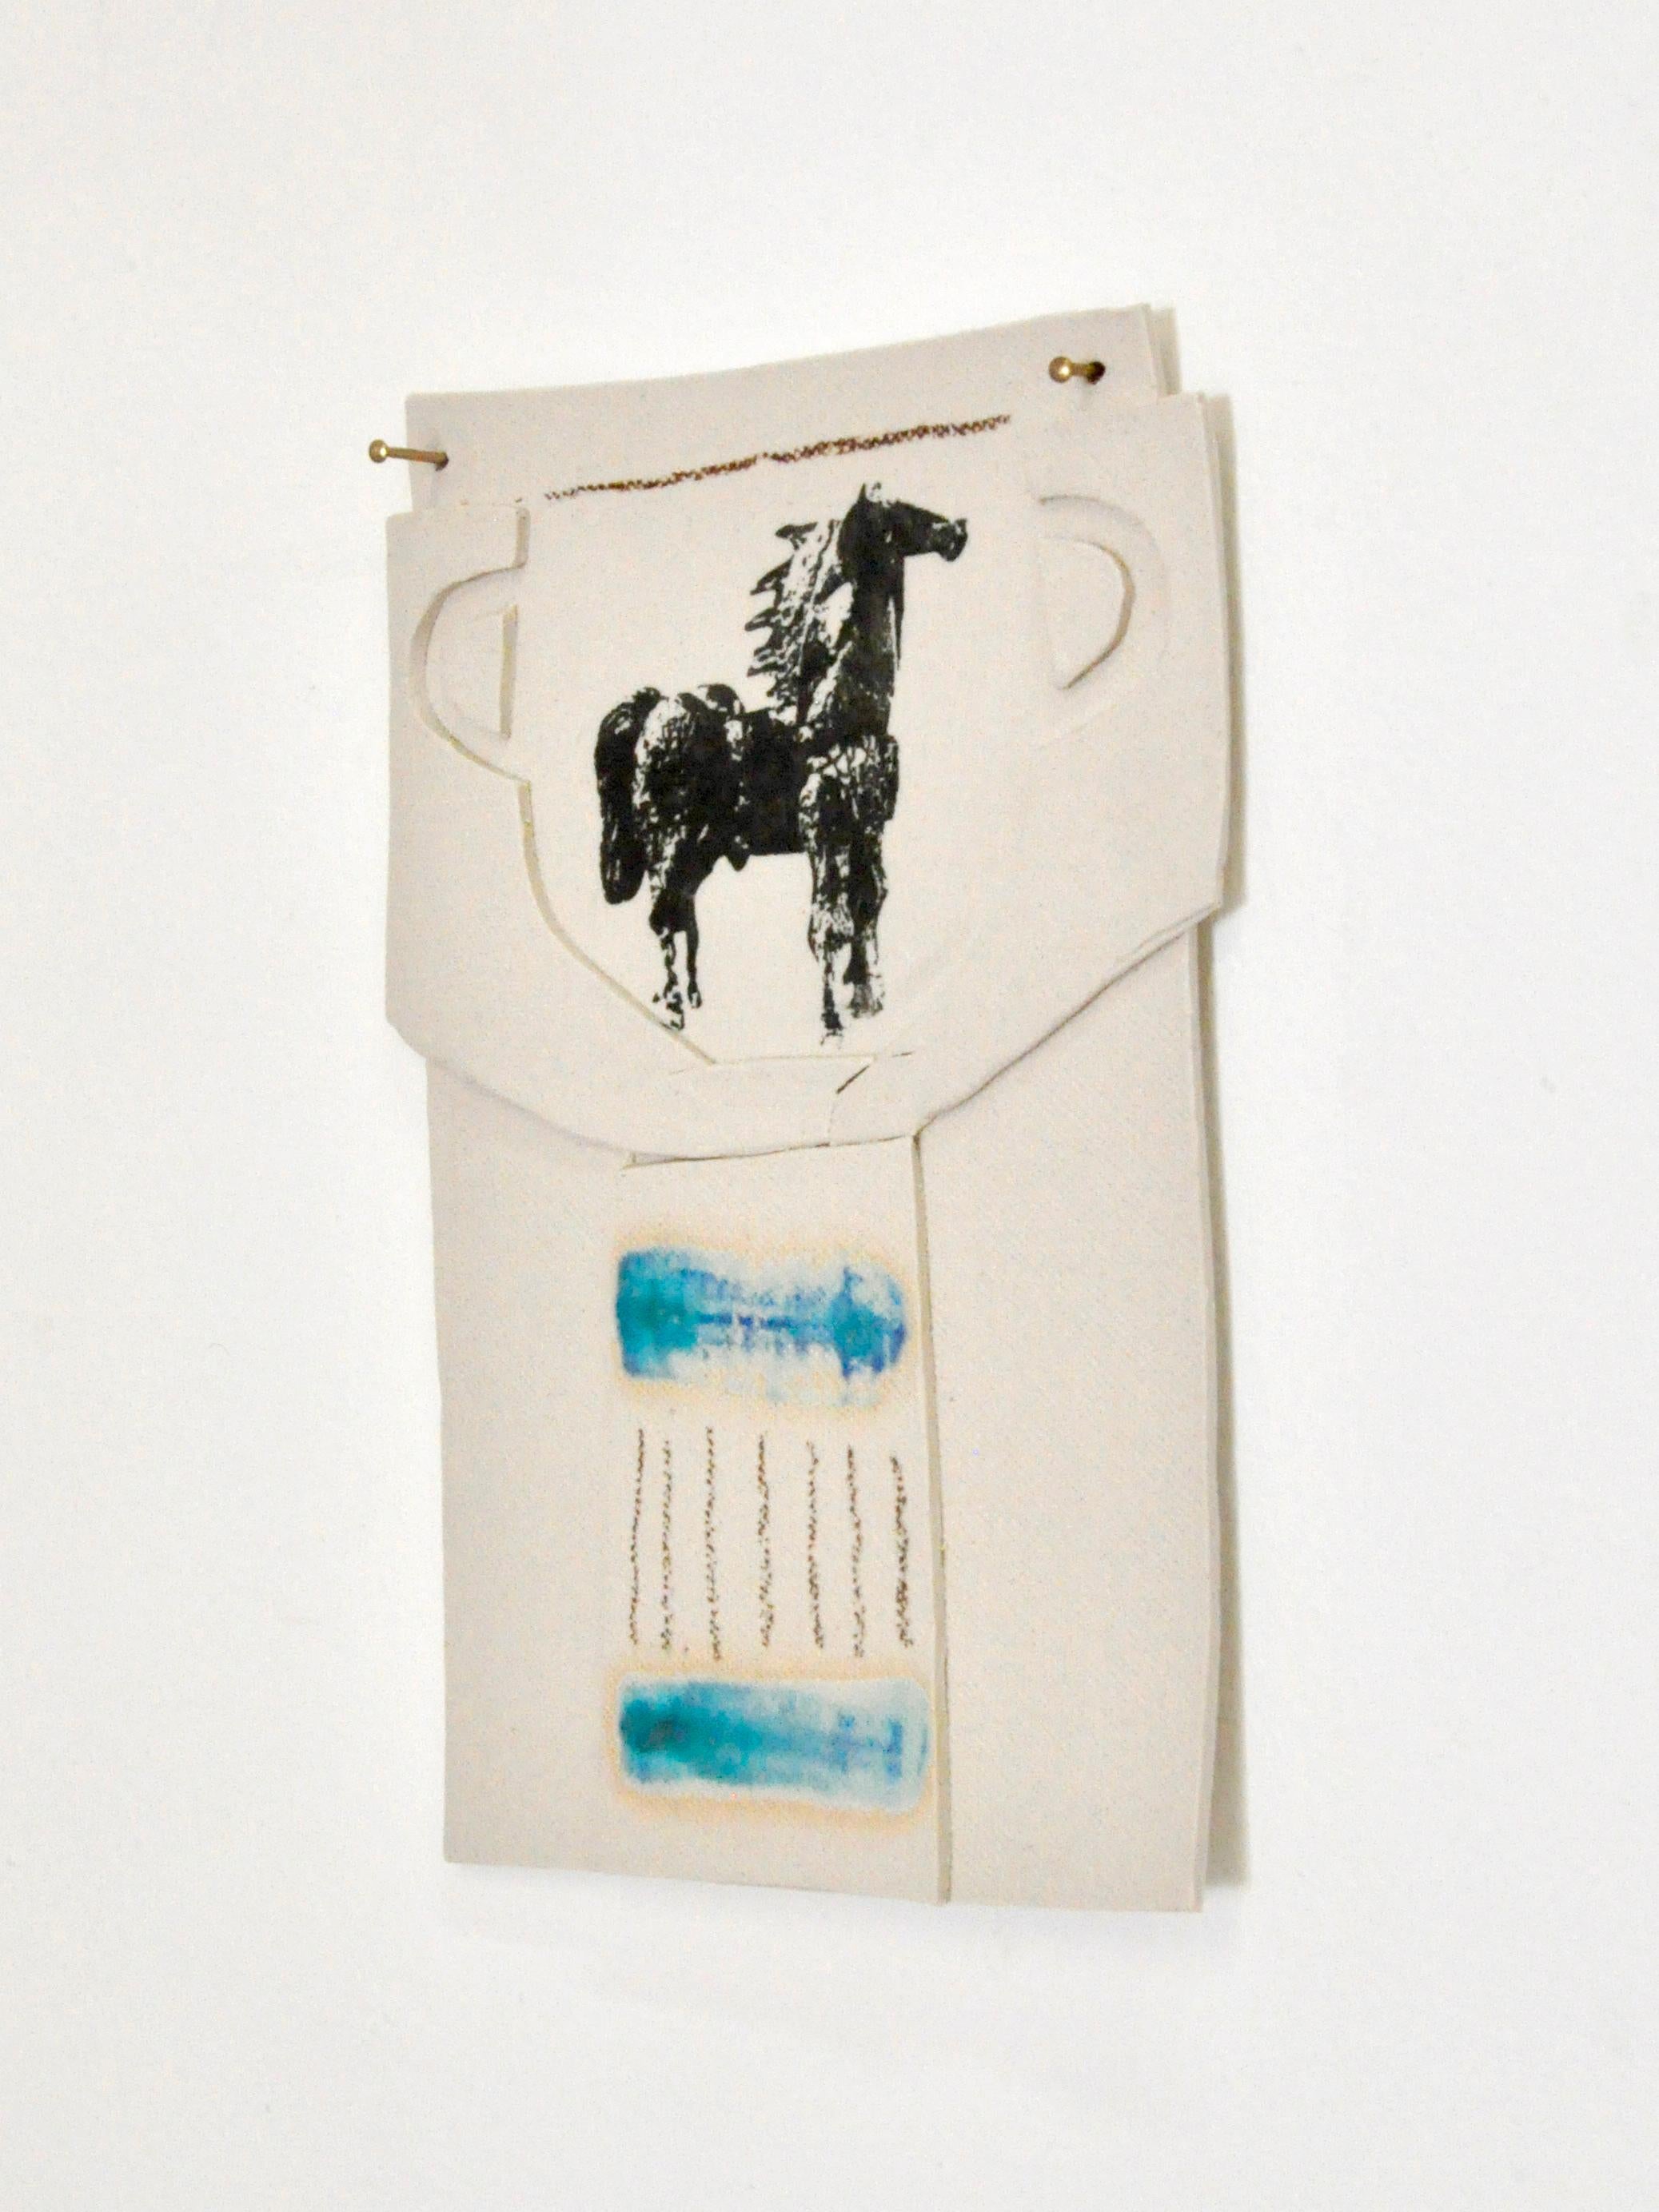 This ceramic and mixed-media vase collage by Alison Owen is a playful yet elegant wall piece made from thin slabs of white stoneware paper clay and mixed-media. The piece is layered with clay cut-outs, screen printed underglaze horse design, and